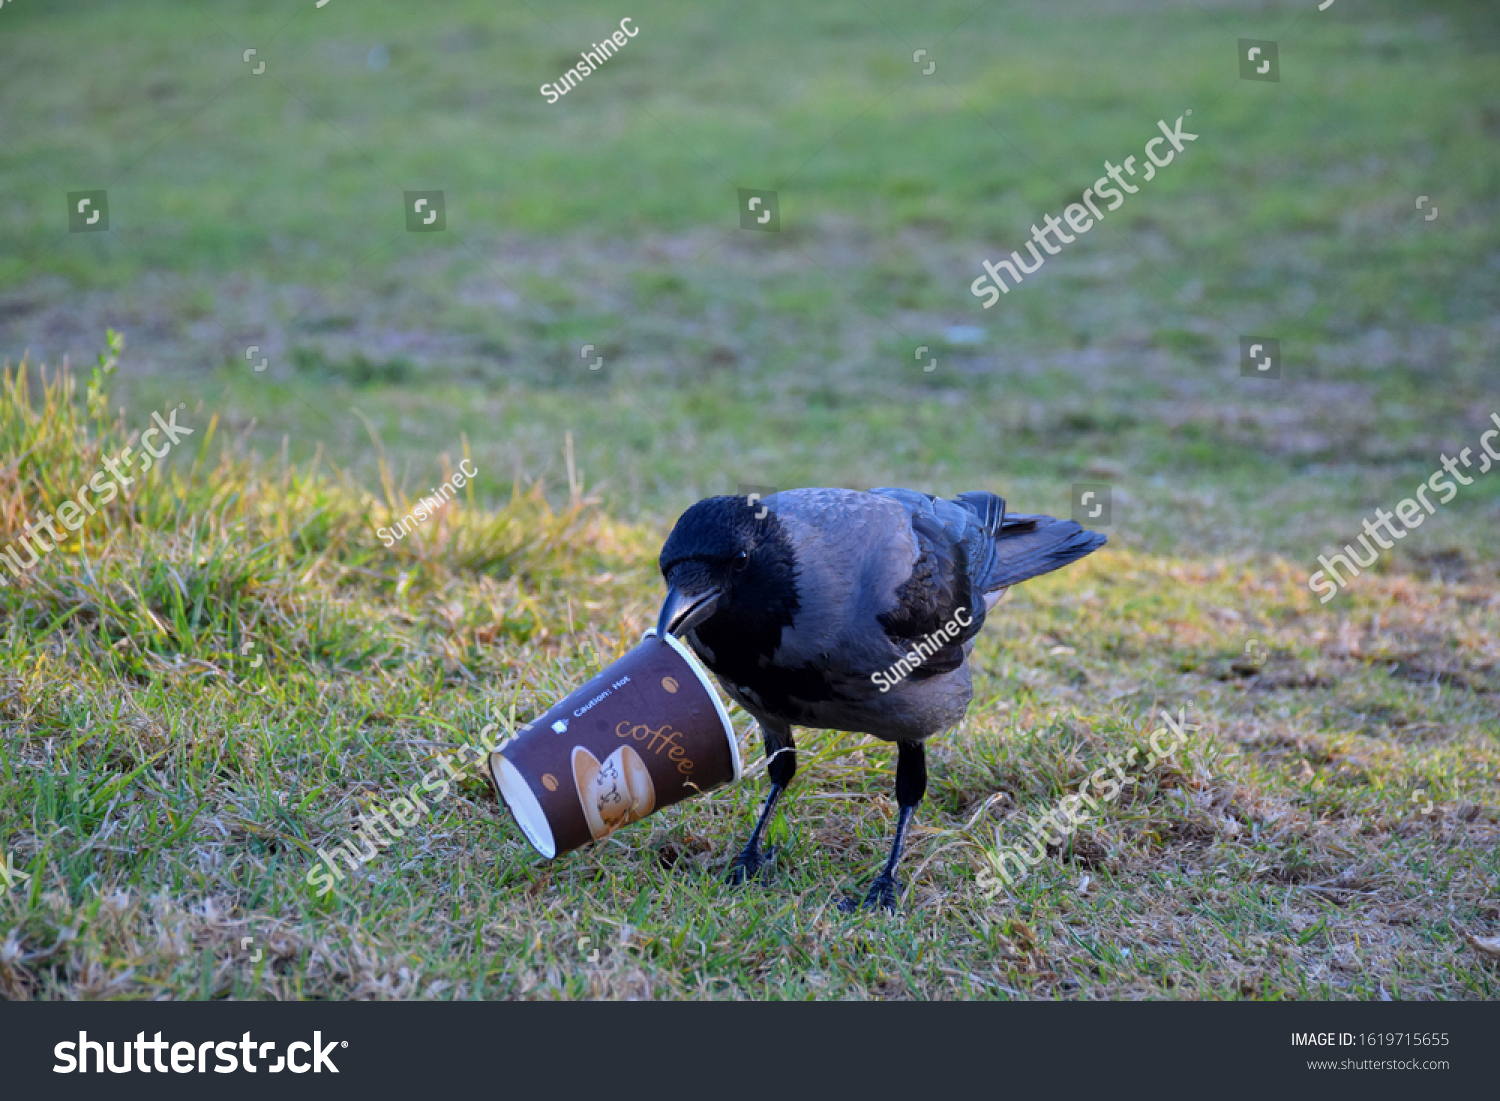 Single crow bird looking for food on the grass in the park, holding disposable hot coffee paper cup in it's beak (made from paper AND plastic coated, non compostable material, need special compost)   #1619715655